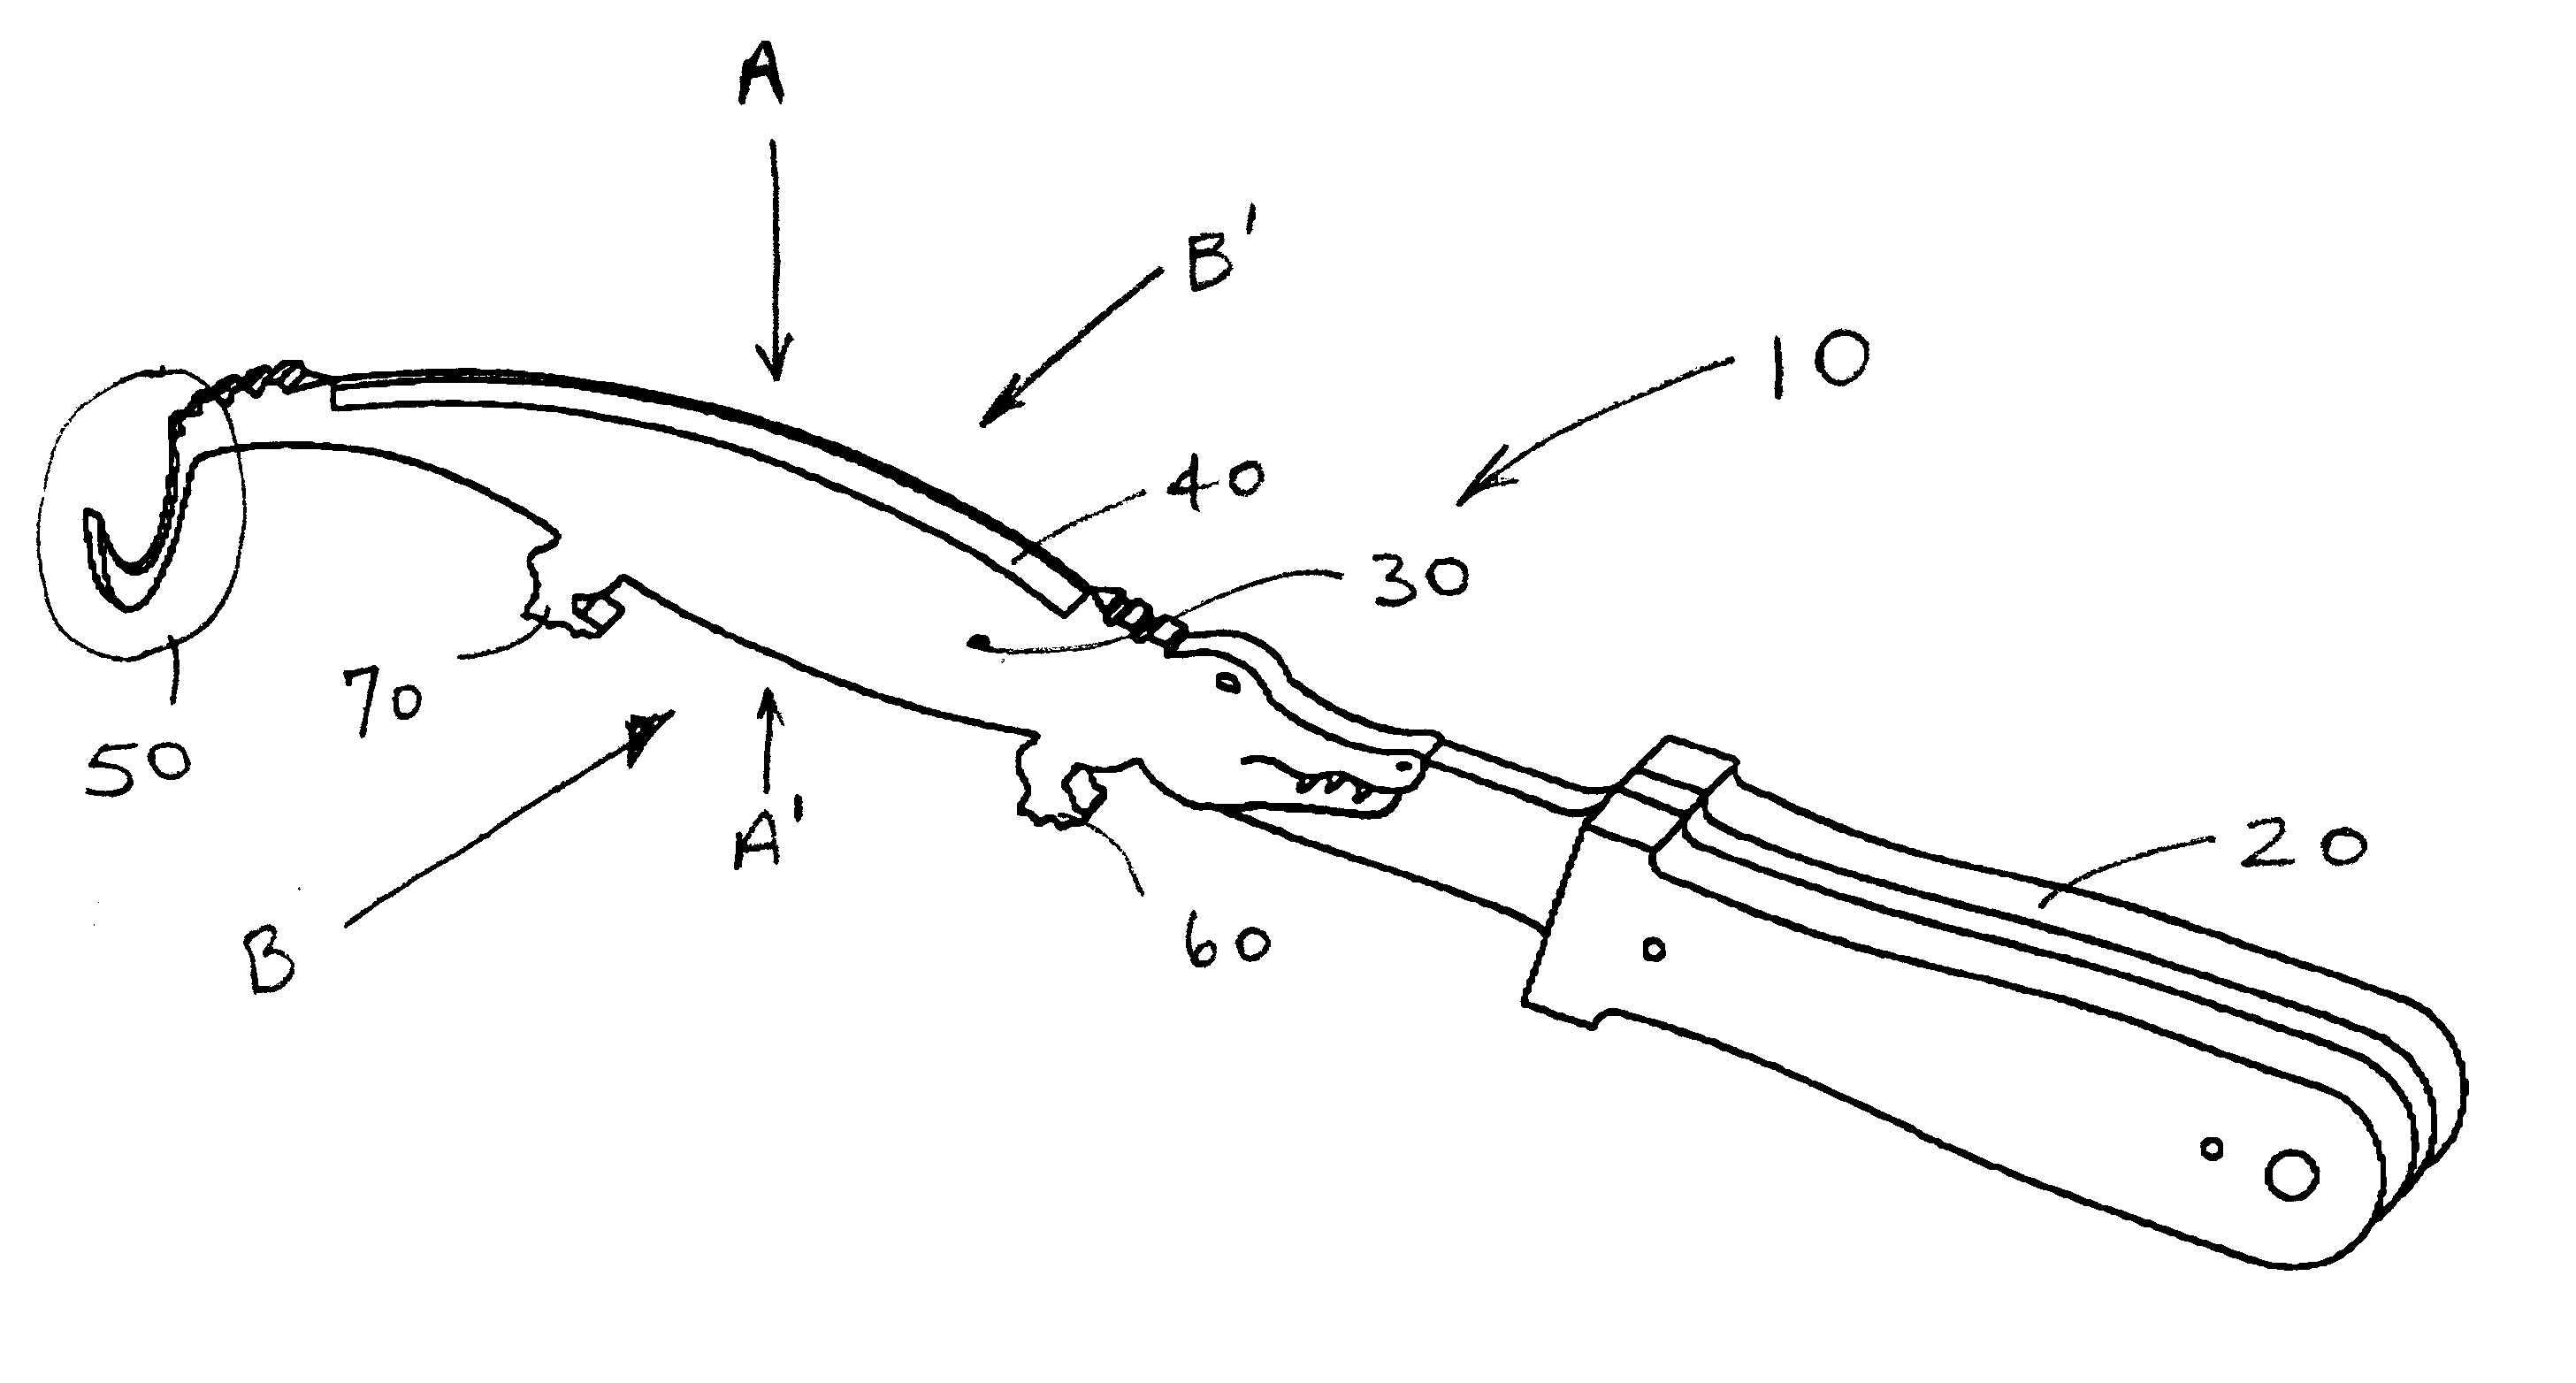 Combination knife, turning hook and bottle de-capper, with animal shape